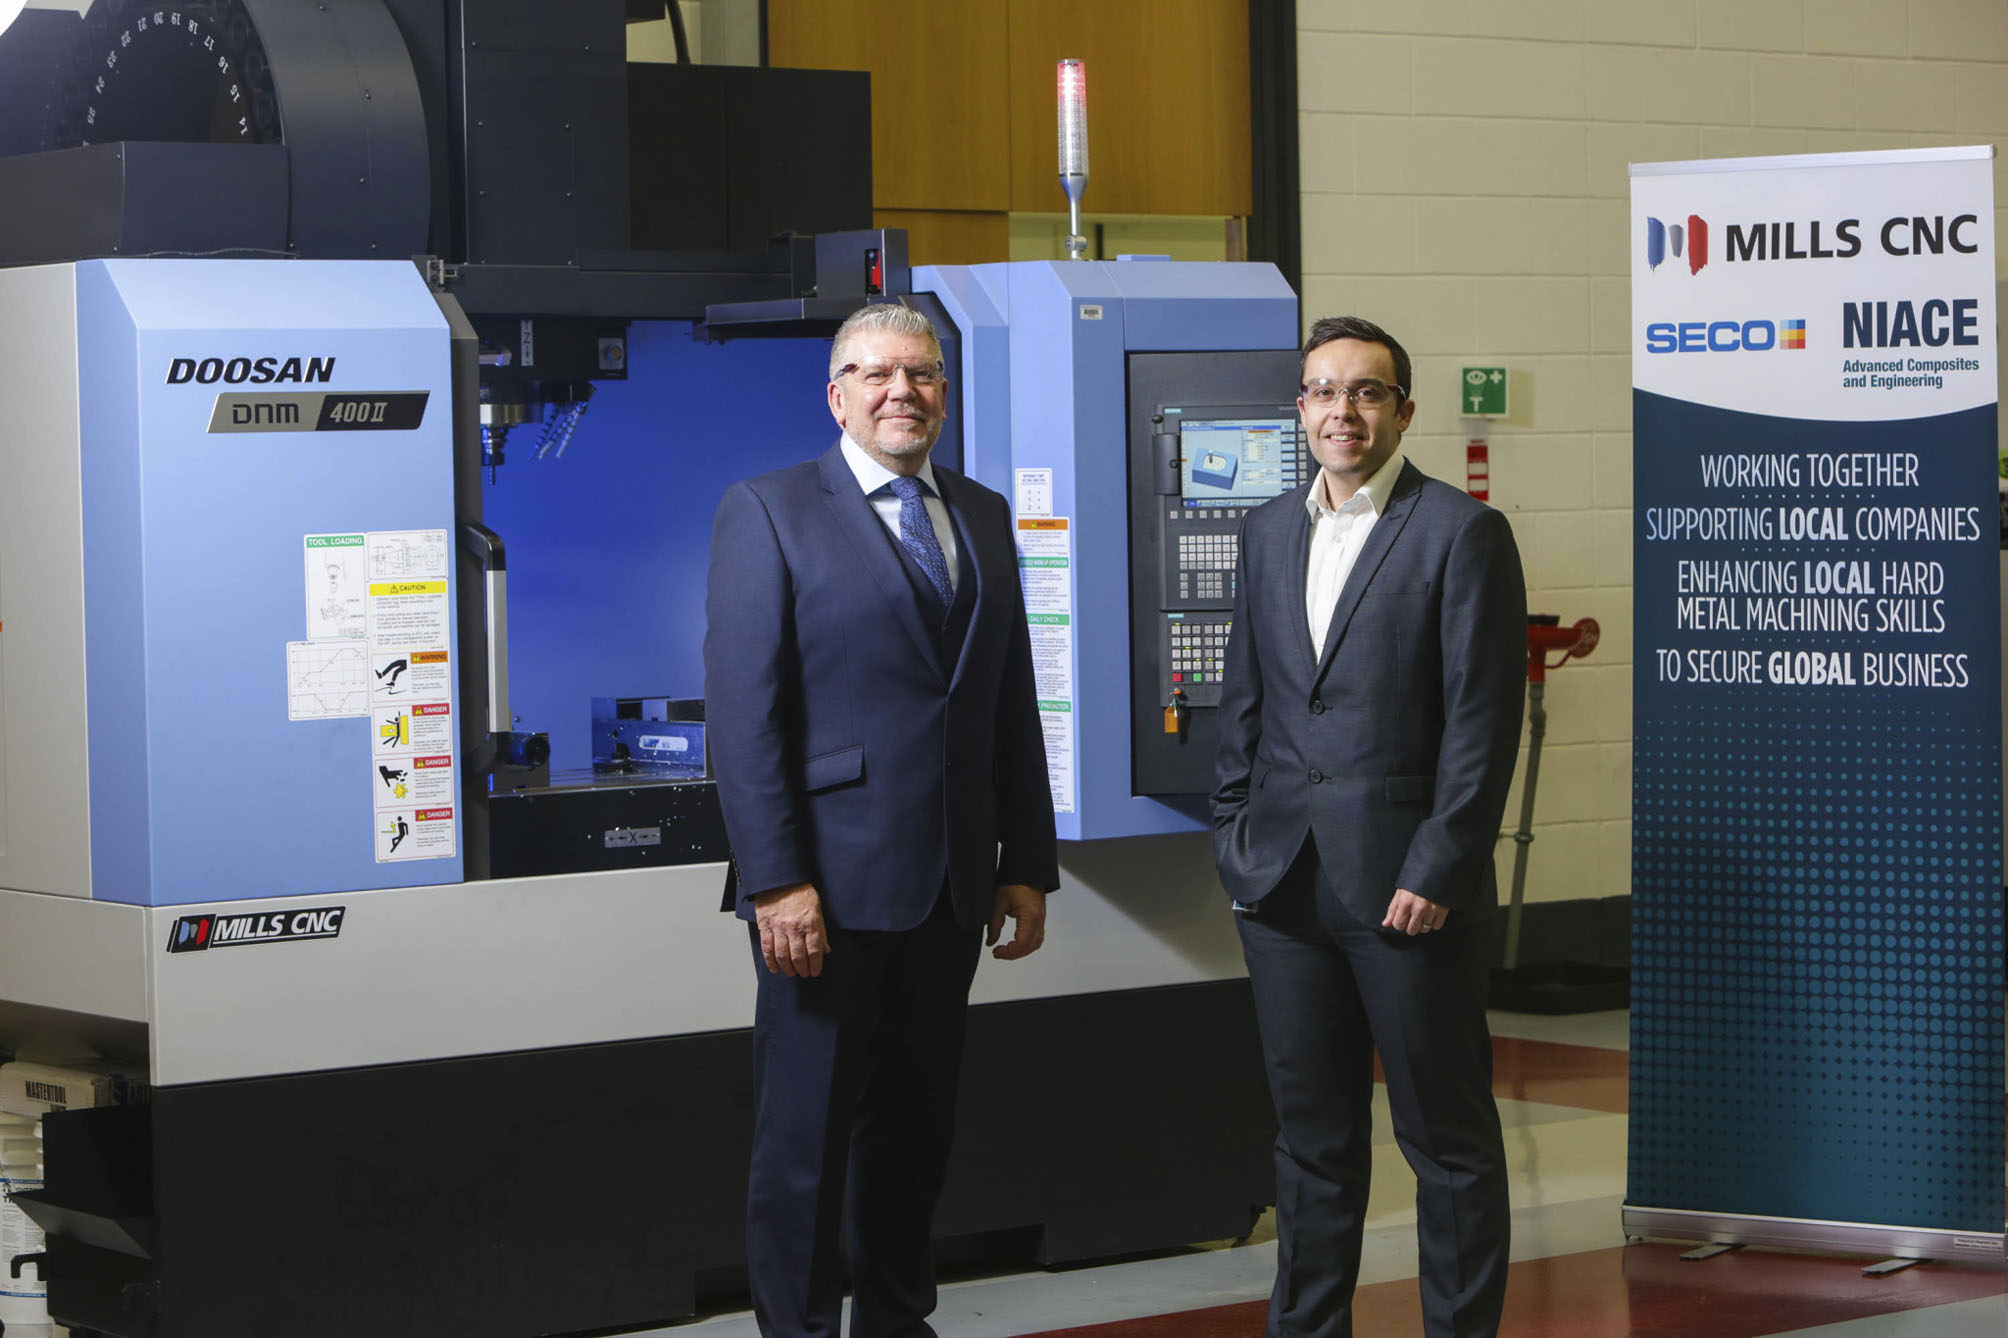 Dr Scott King, Manager at the NIACE Centre (right) with Mr Martin Blakely, Mills CNC’s Business Manager Ireland (left), in front of the Doosan DNM 400 II.